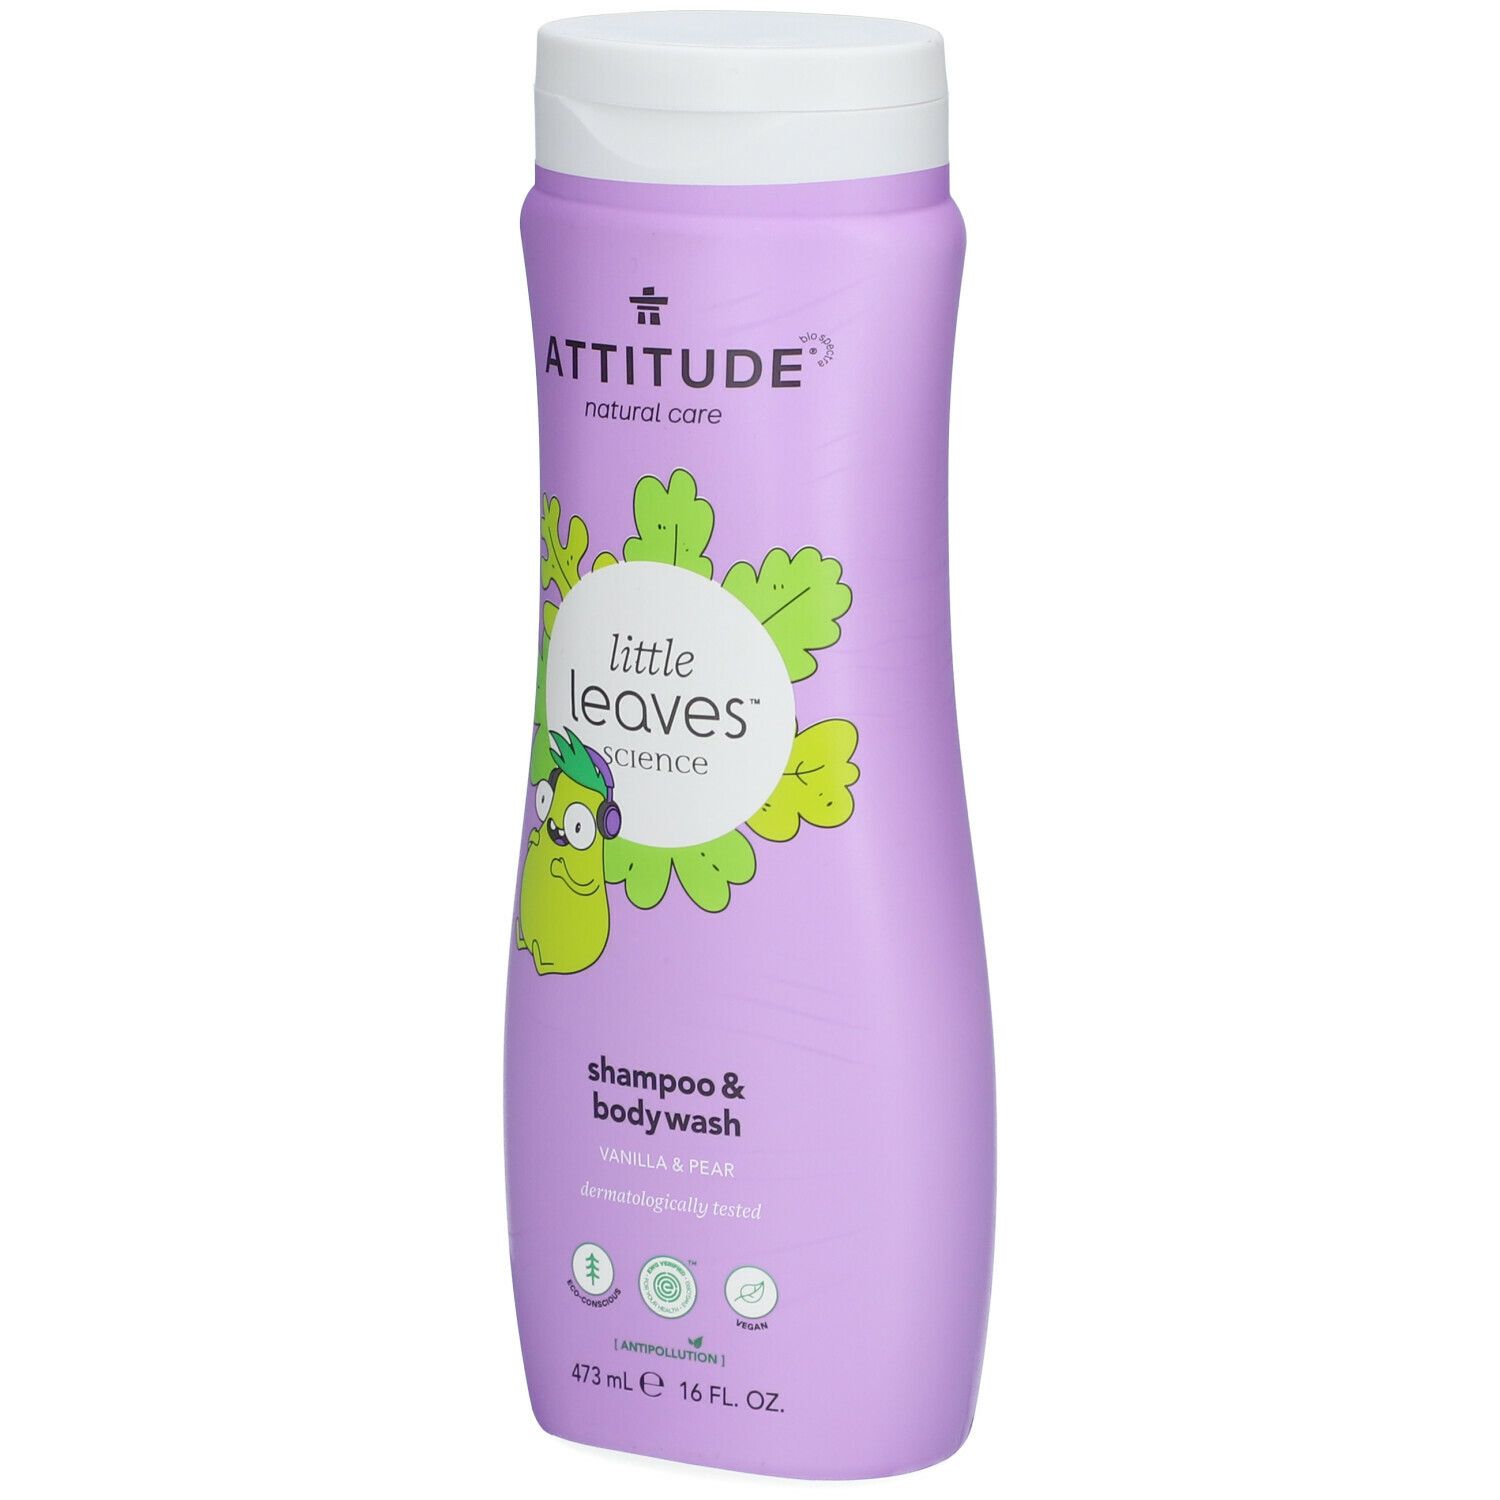 ATTITUDE® baby leaves 2-in-1 shampoo